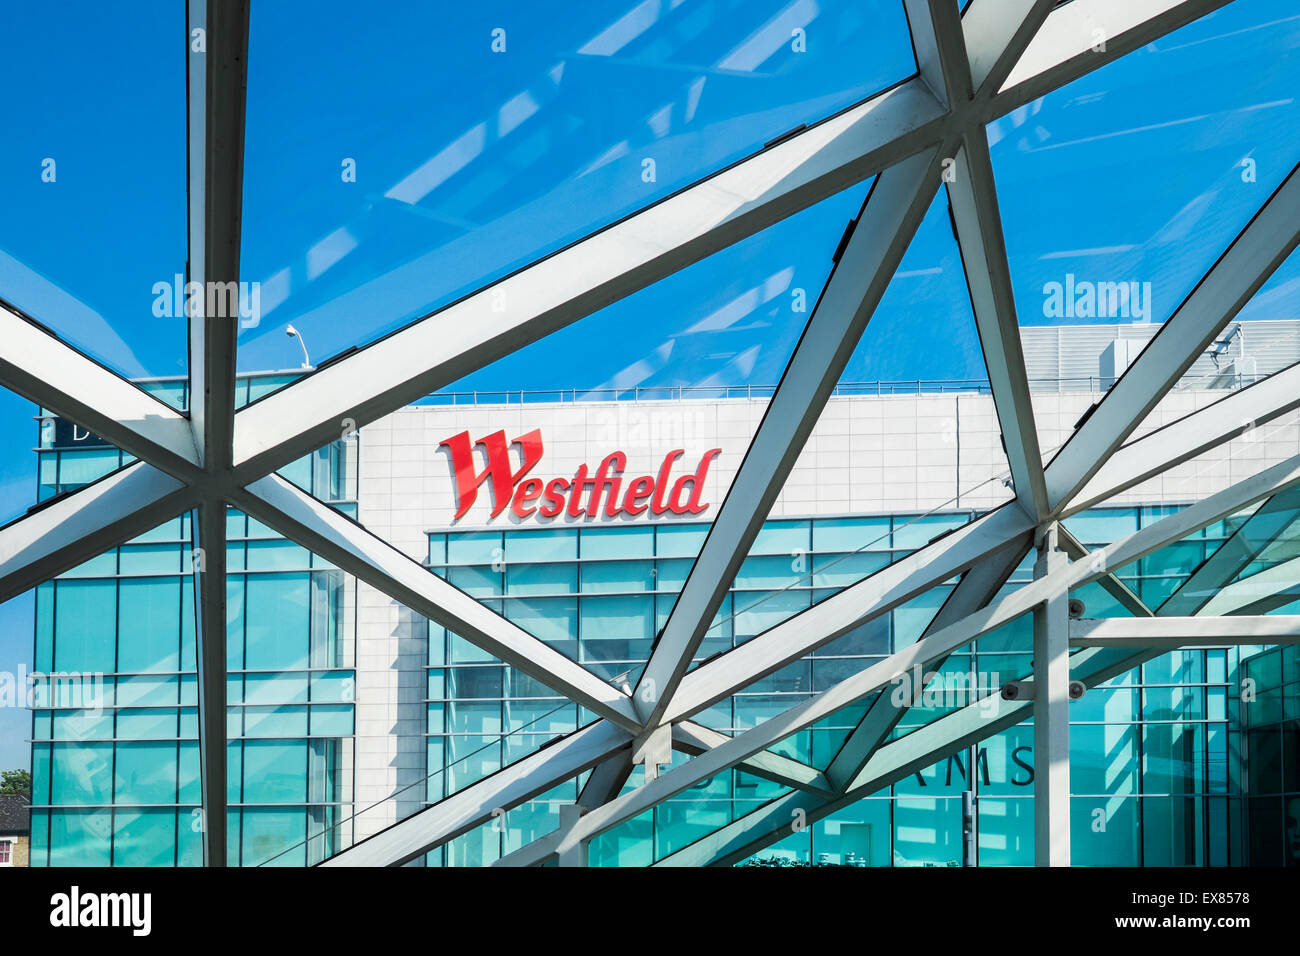 Westfield London Shopping Centre Stock Photo - Download Image Now